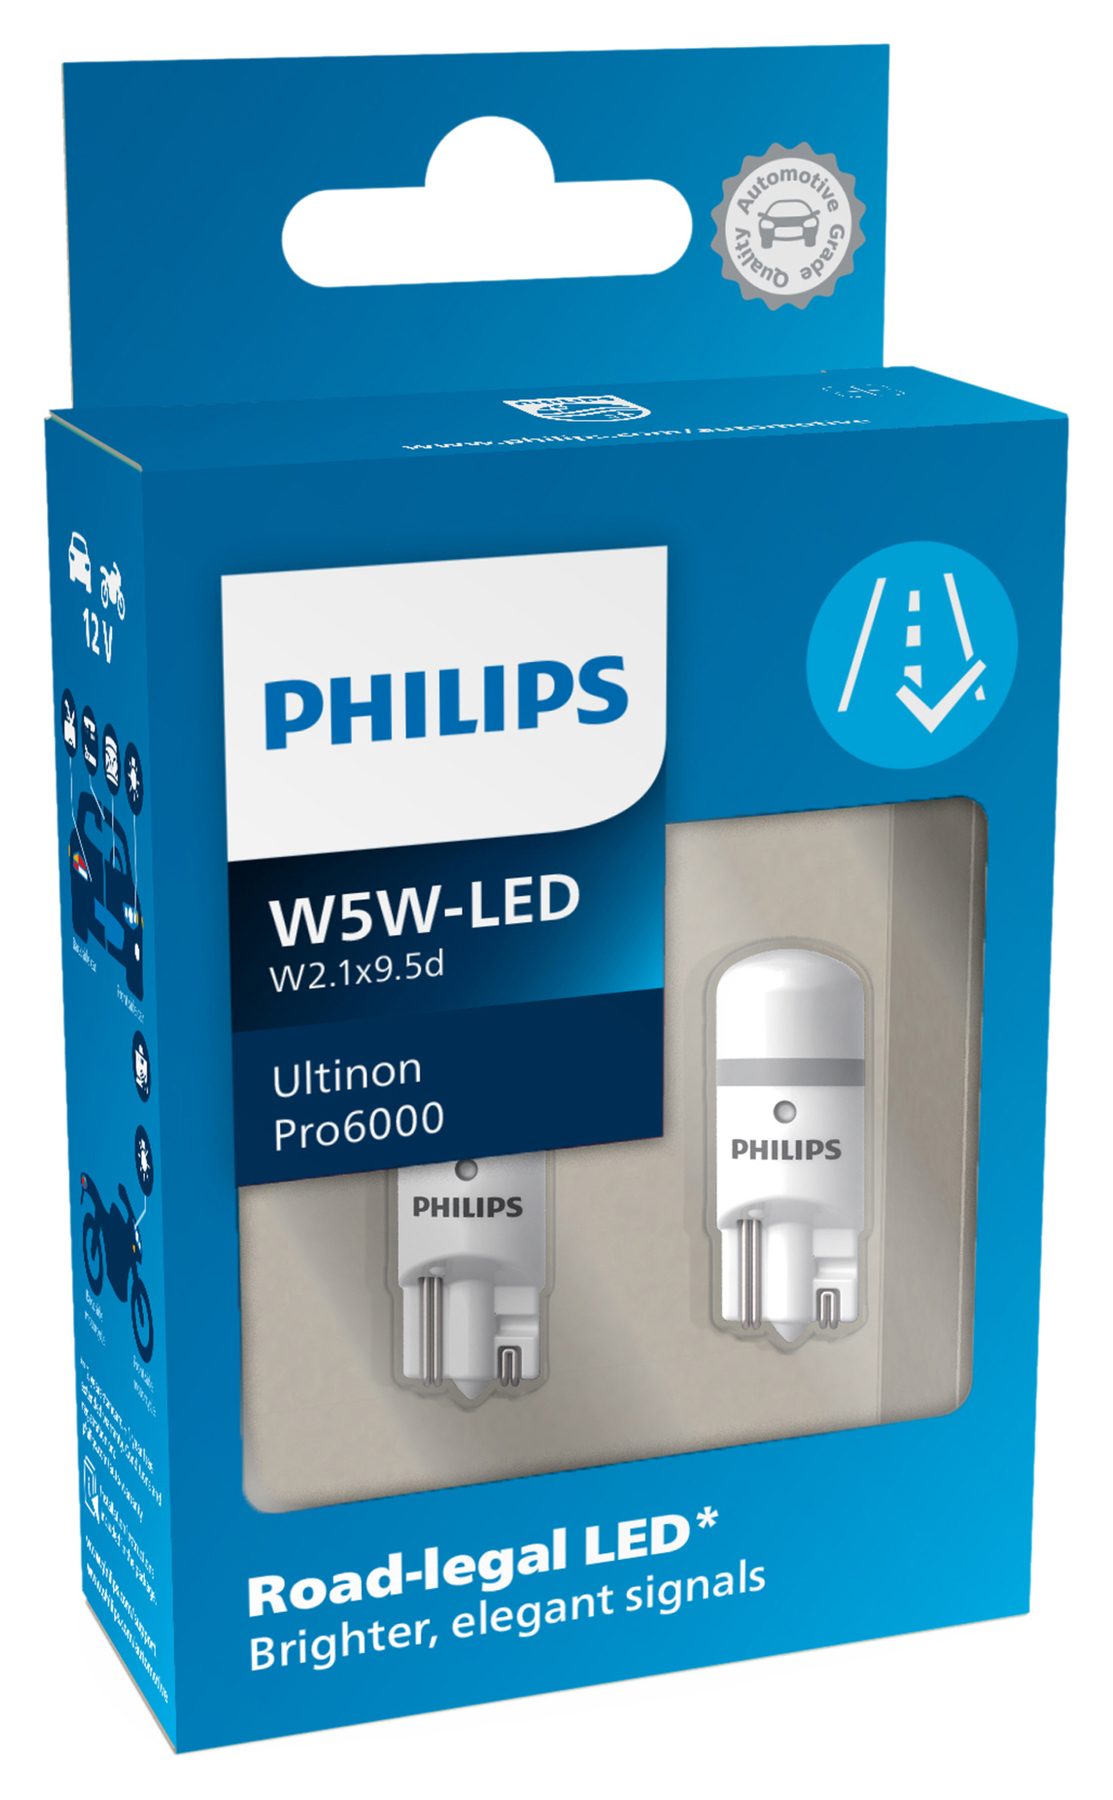 Philips Ultinon Pro6000 W5W T10 LED Car Light with Road Legal